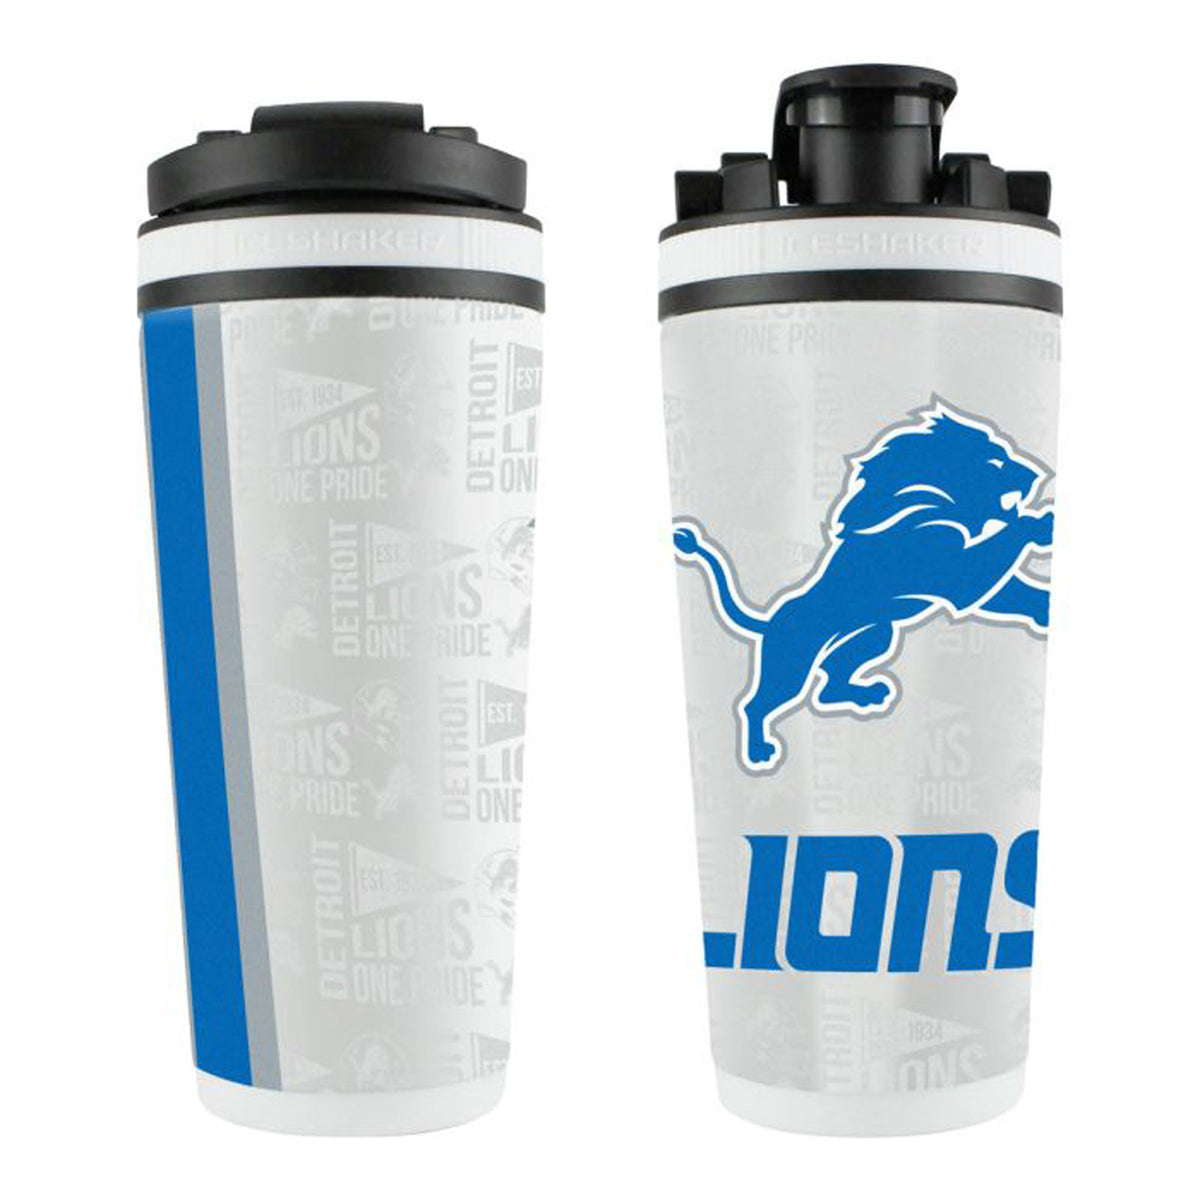 NFL Detroit Lions Cup Holder tumbler Not Included 